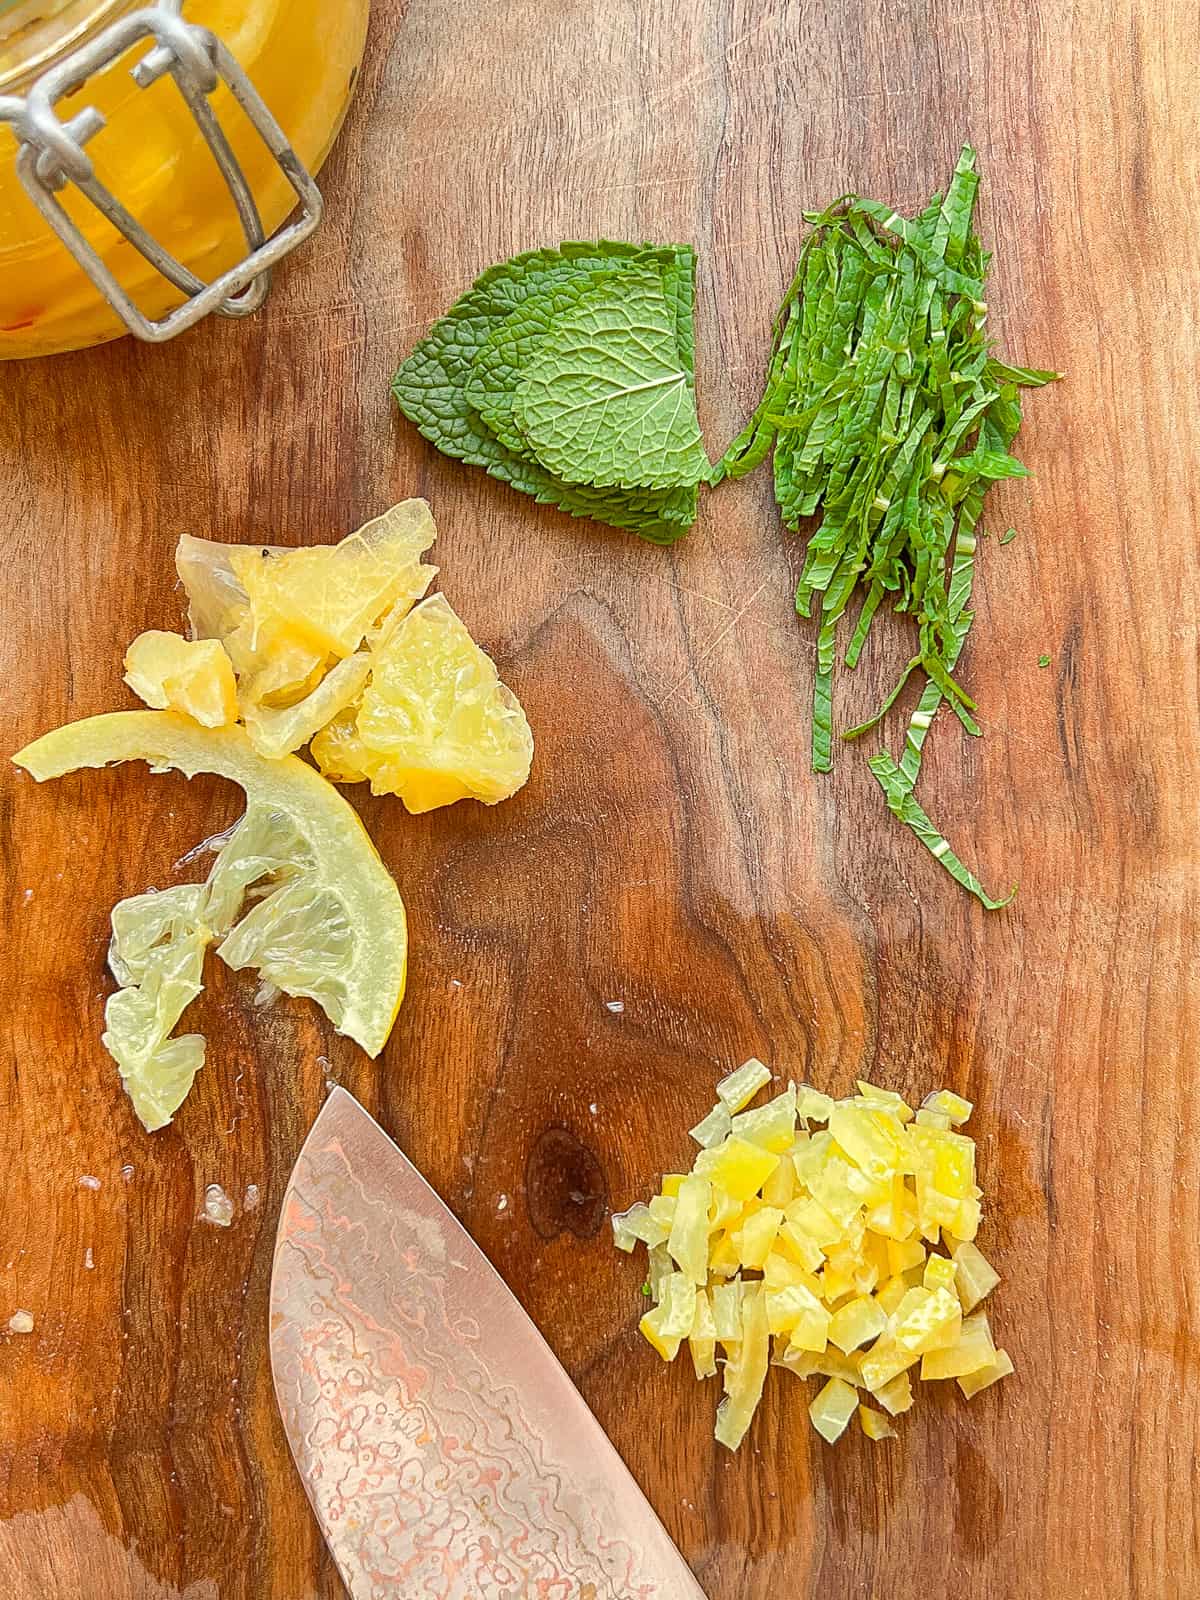 An image of preserved lemon being cut, and mint being slivered, on a wooden cutting board.